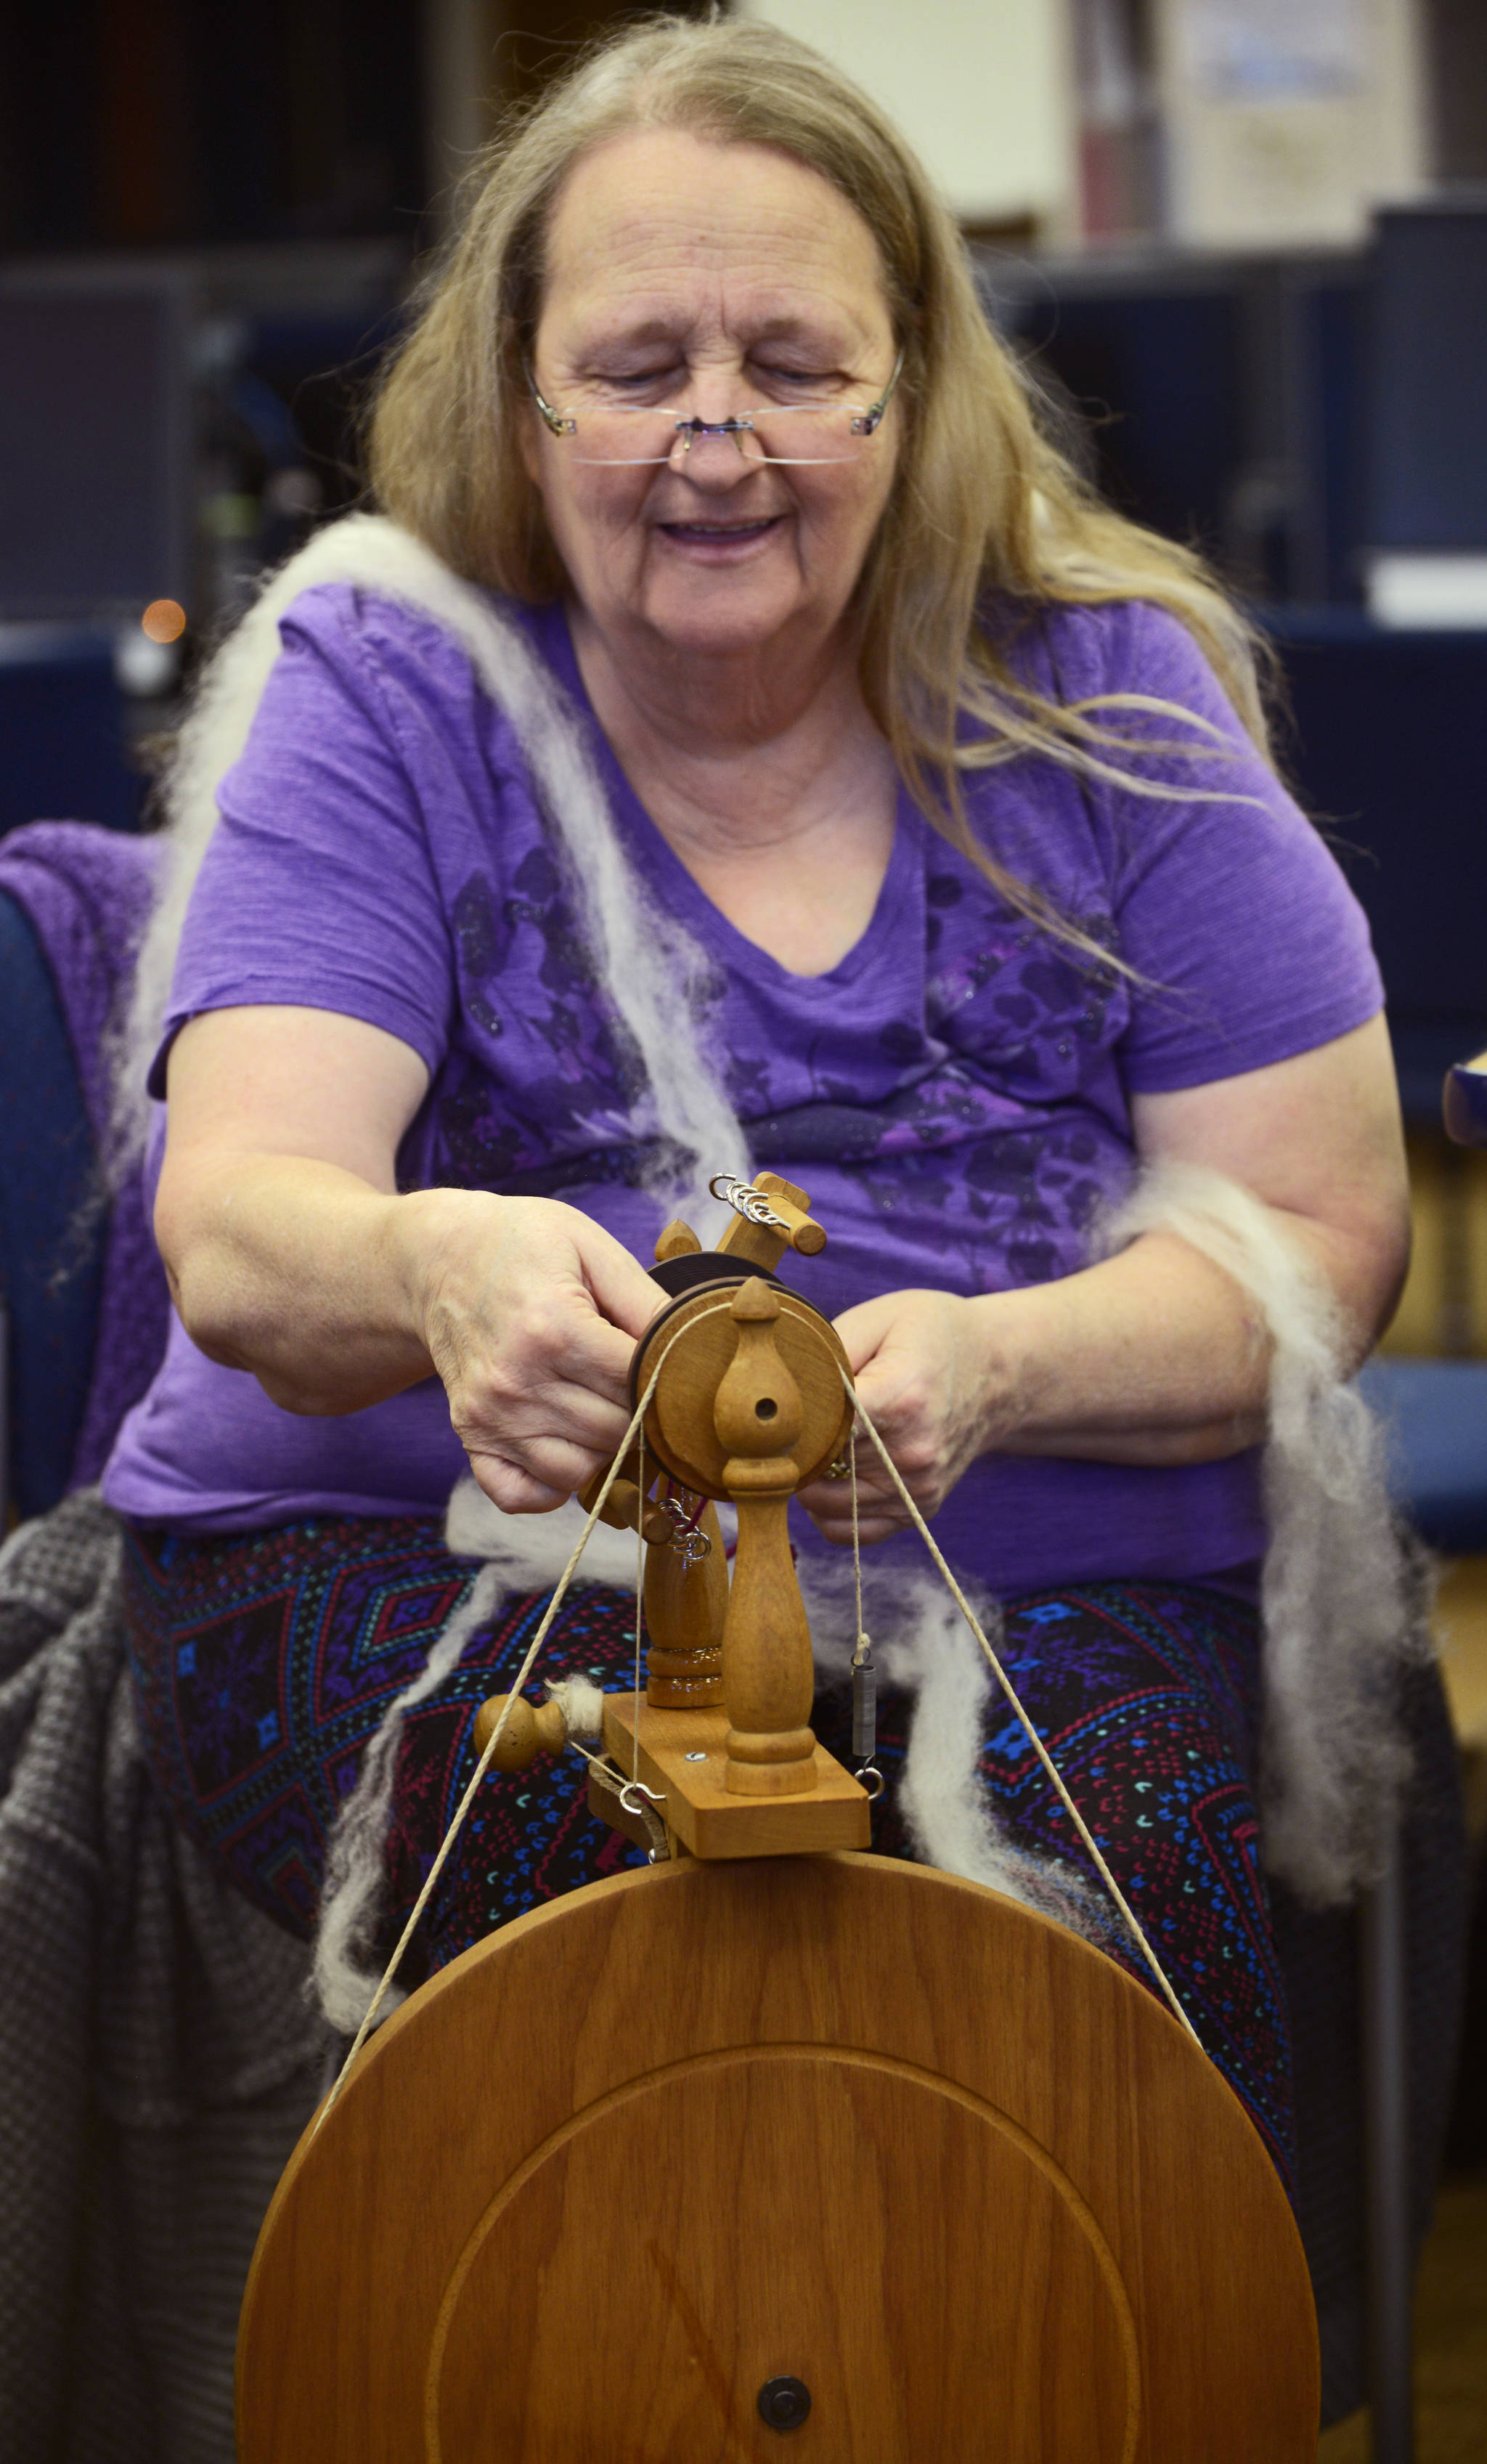 Debora Meester adjusts the bobbin of a spinning wheel while spinning wool into yarn during the first session of the Soldotna Community Schools yarn-spinning class on Tuesday in the library of the Soldotna Preparatory School in Soldotna. (Ben Boettger/Peninsula Clarion)